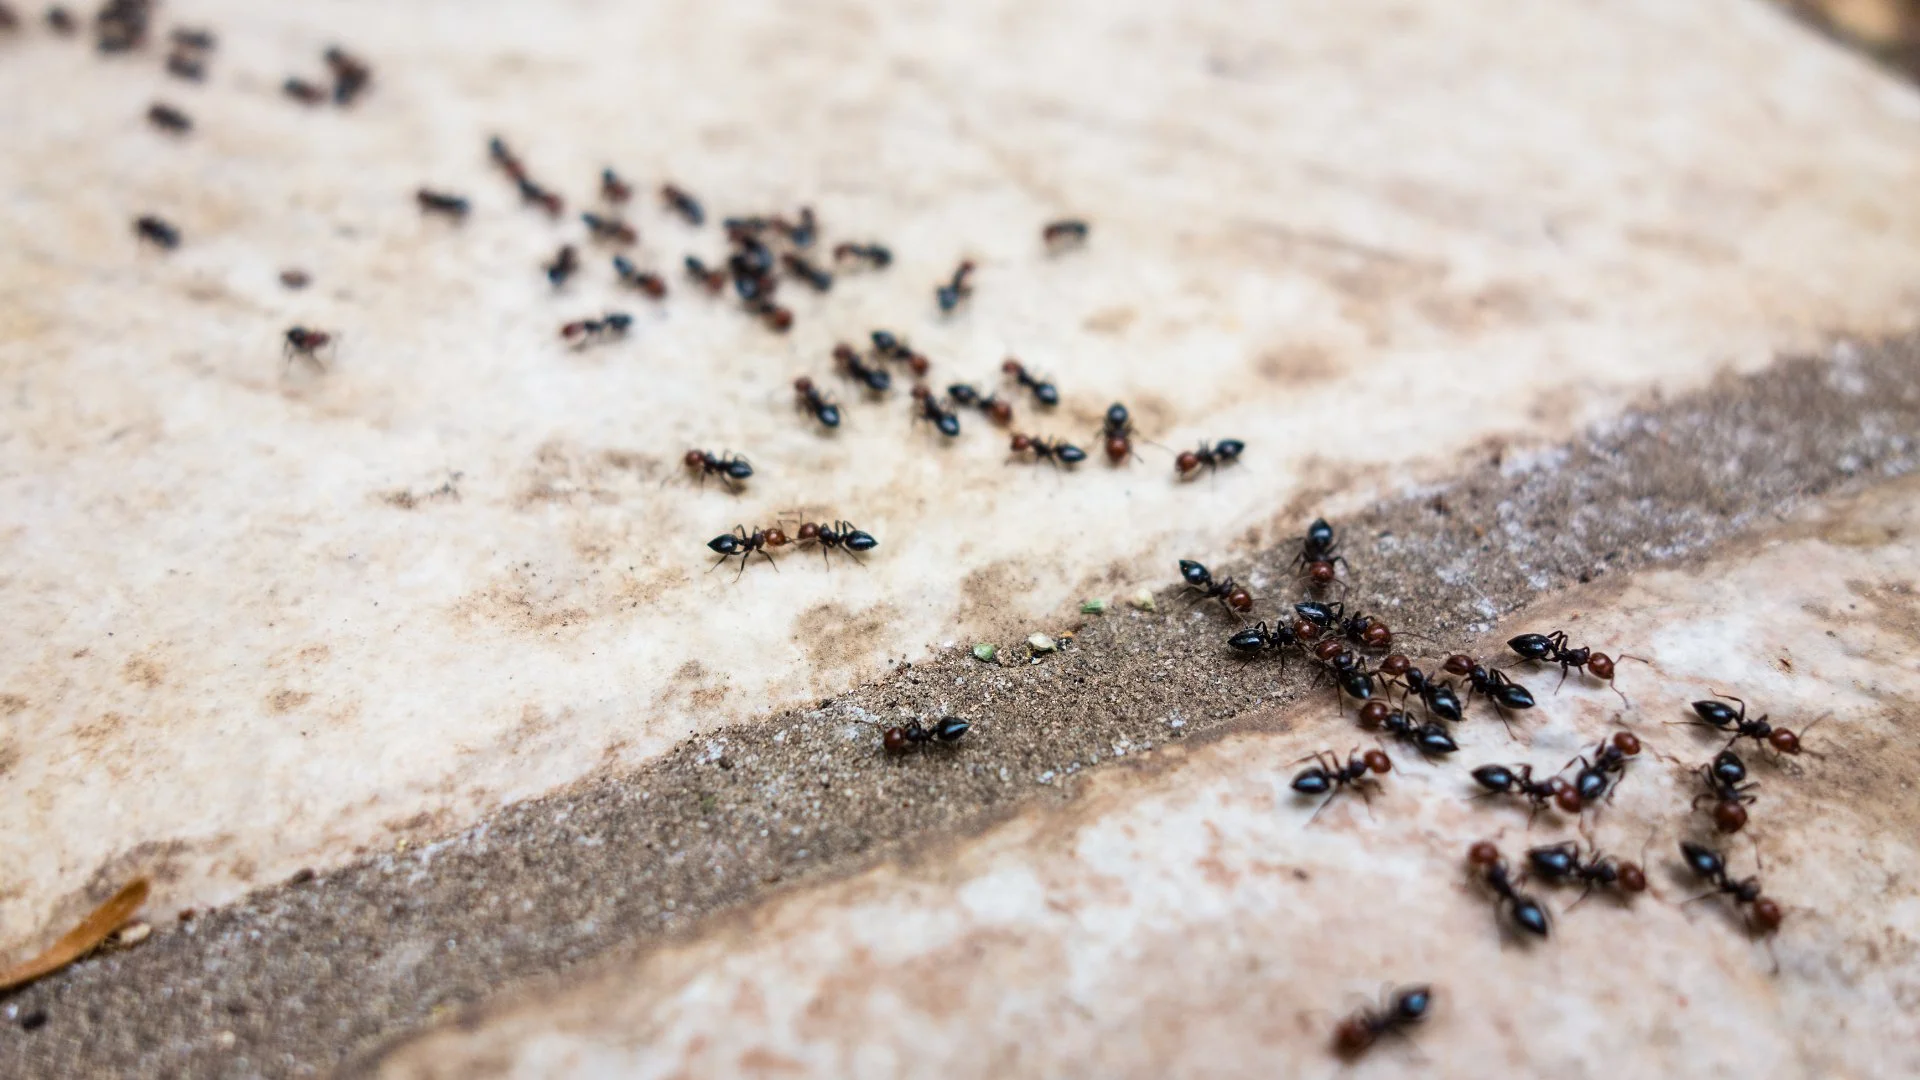 Spring Is Here & So Are Wasps & Ants! Control These Pests With These Tips